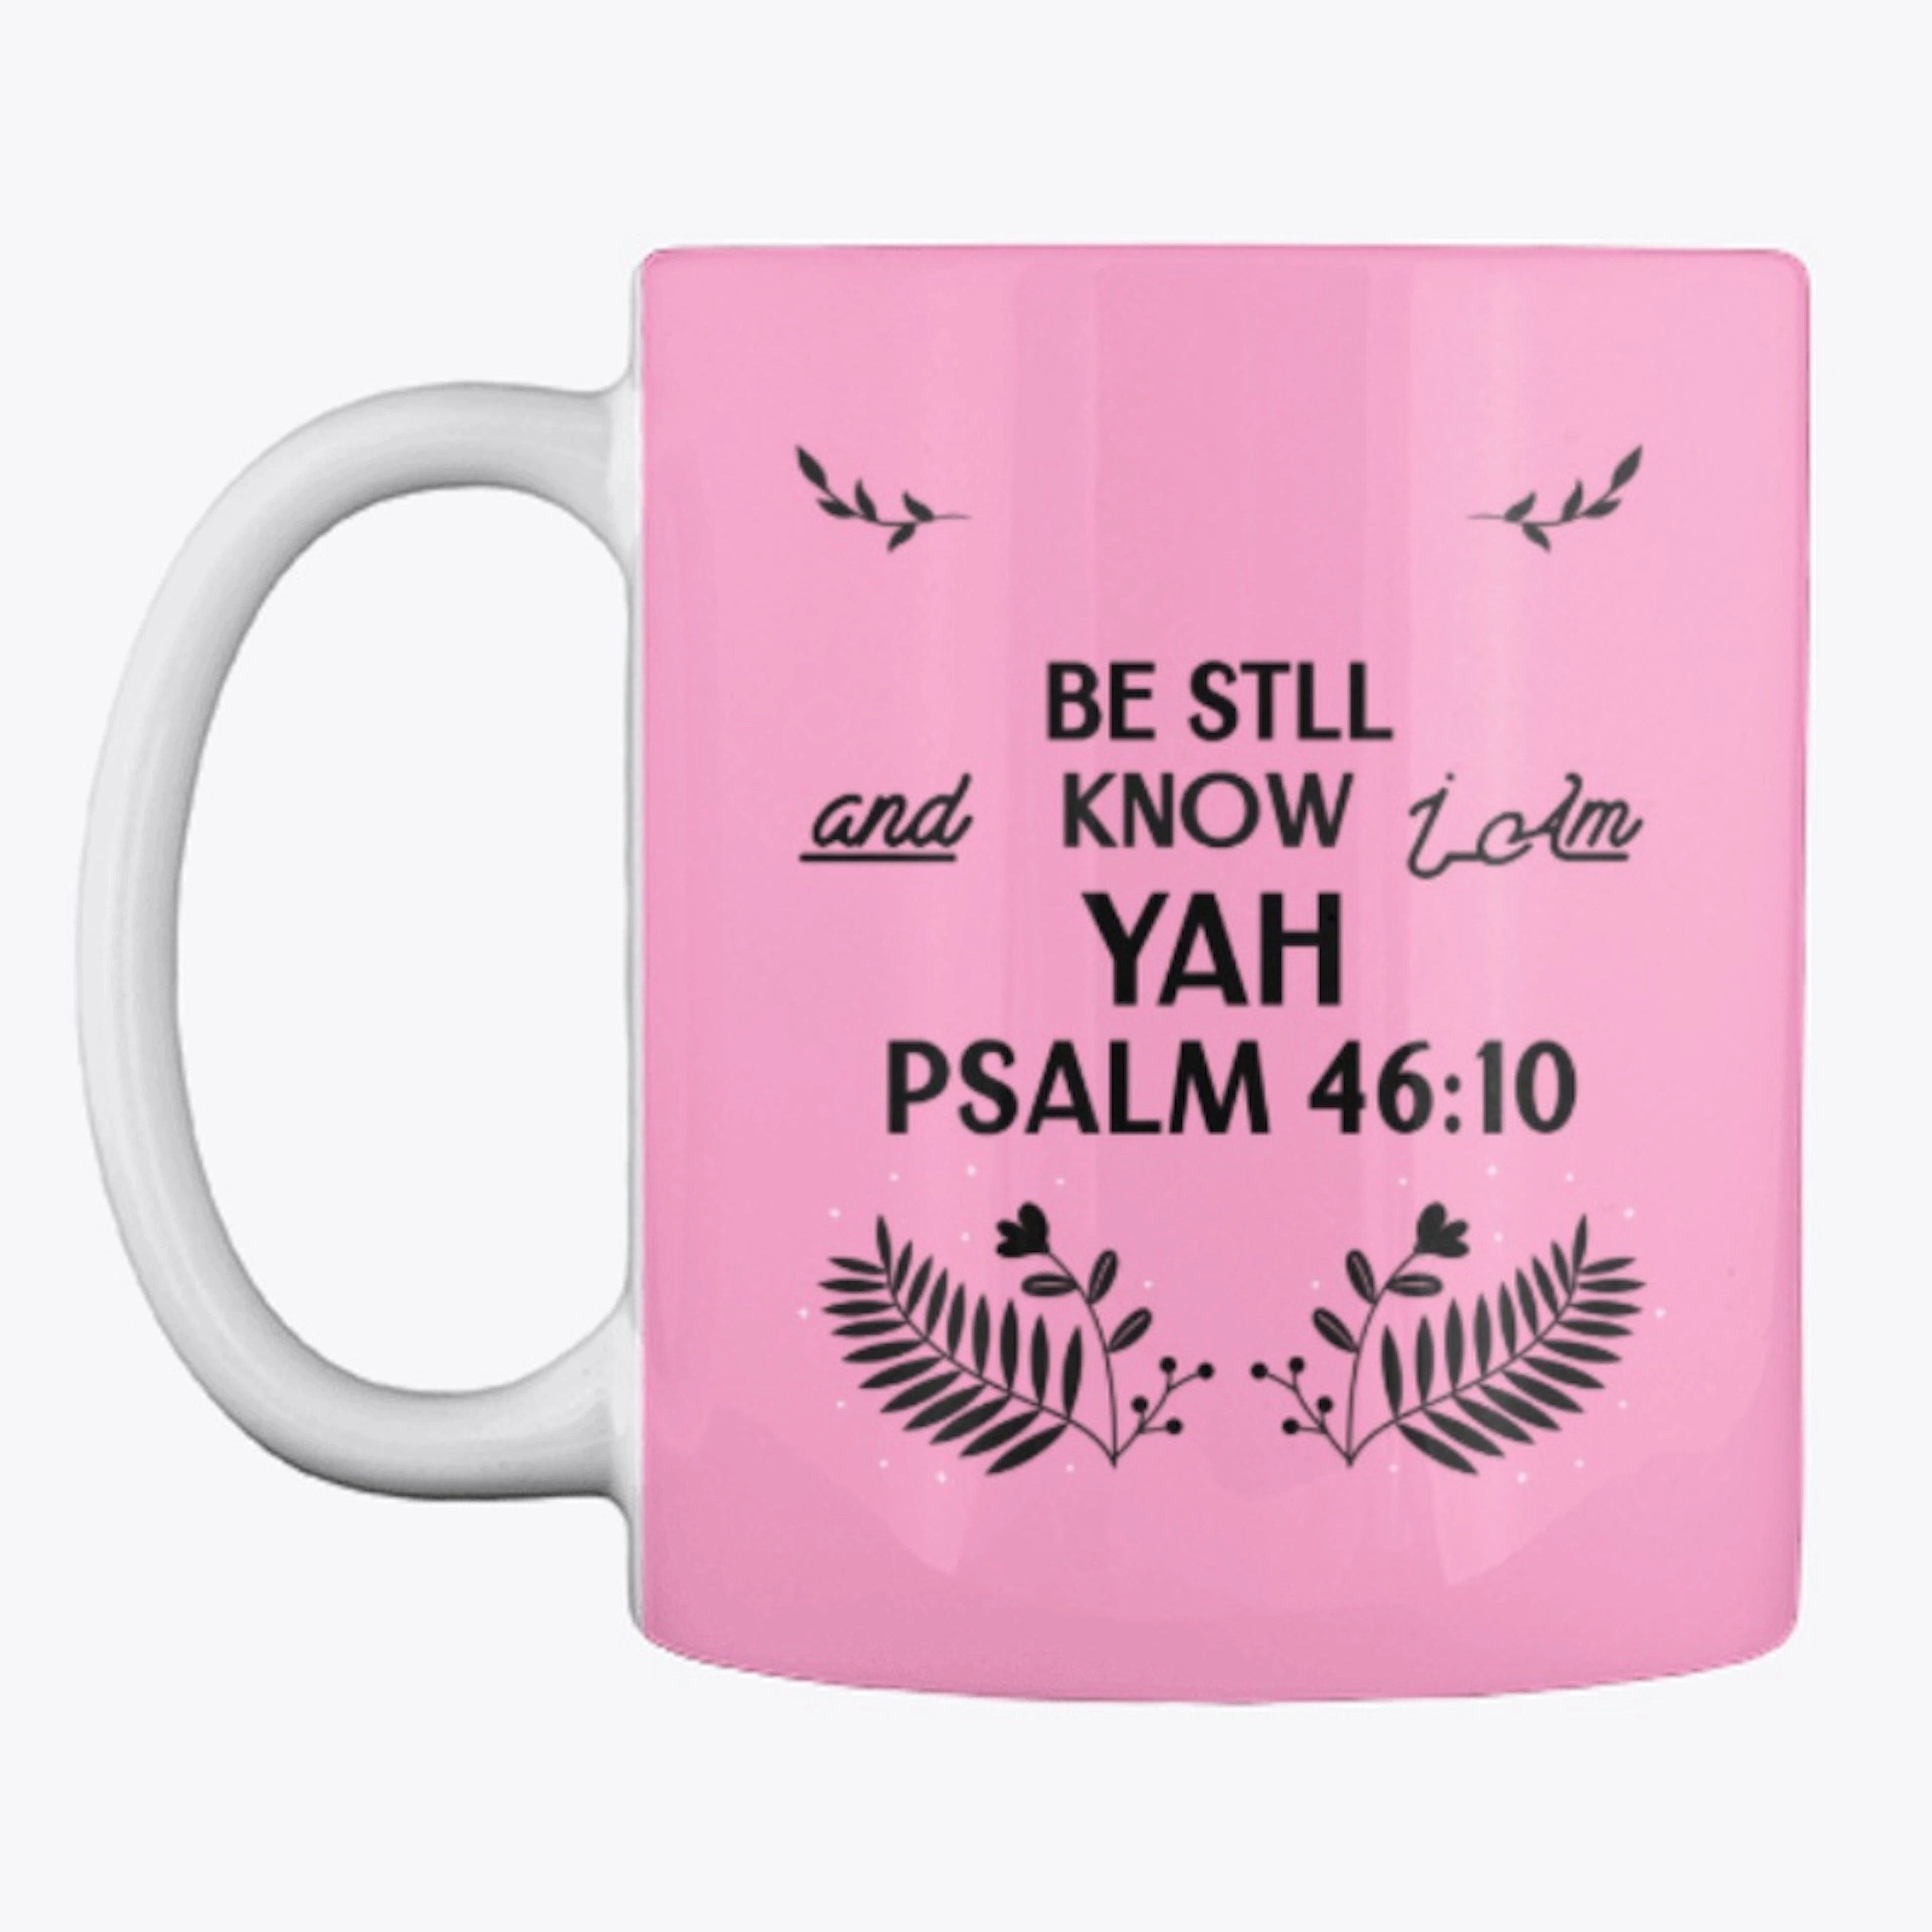 -Psalm 46:10- Be Still and know I am YAH